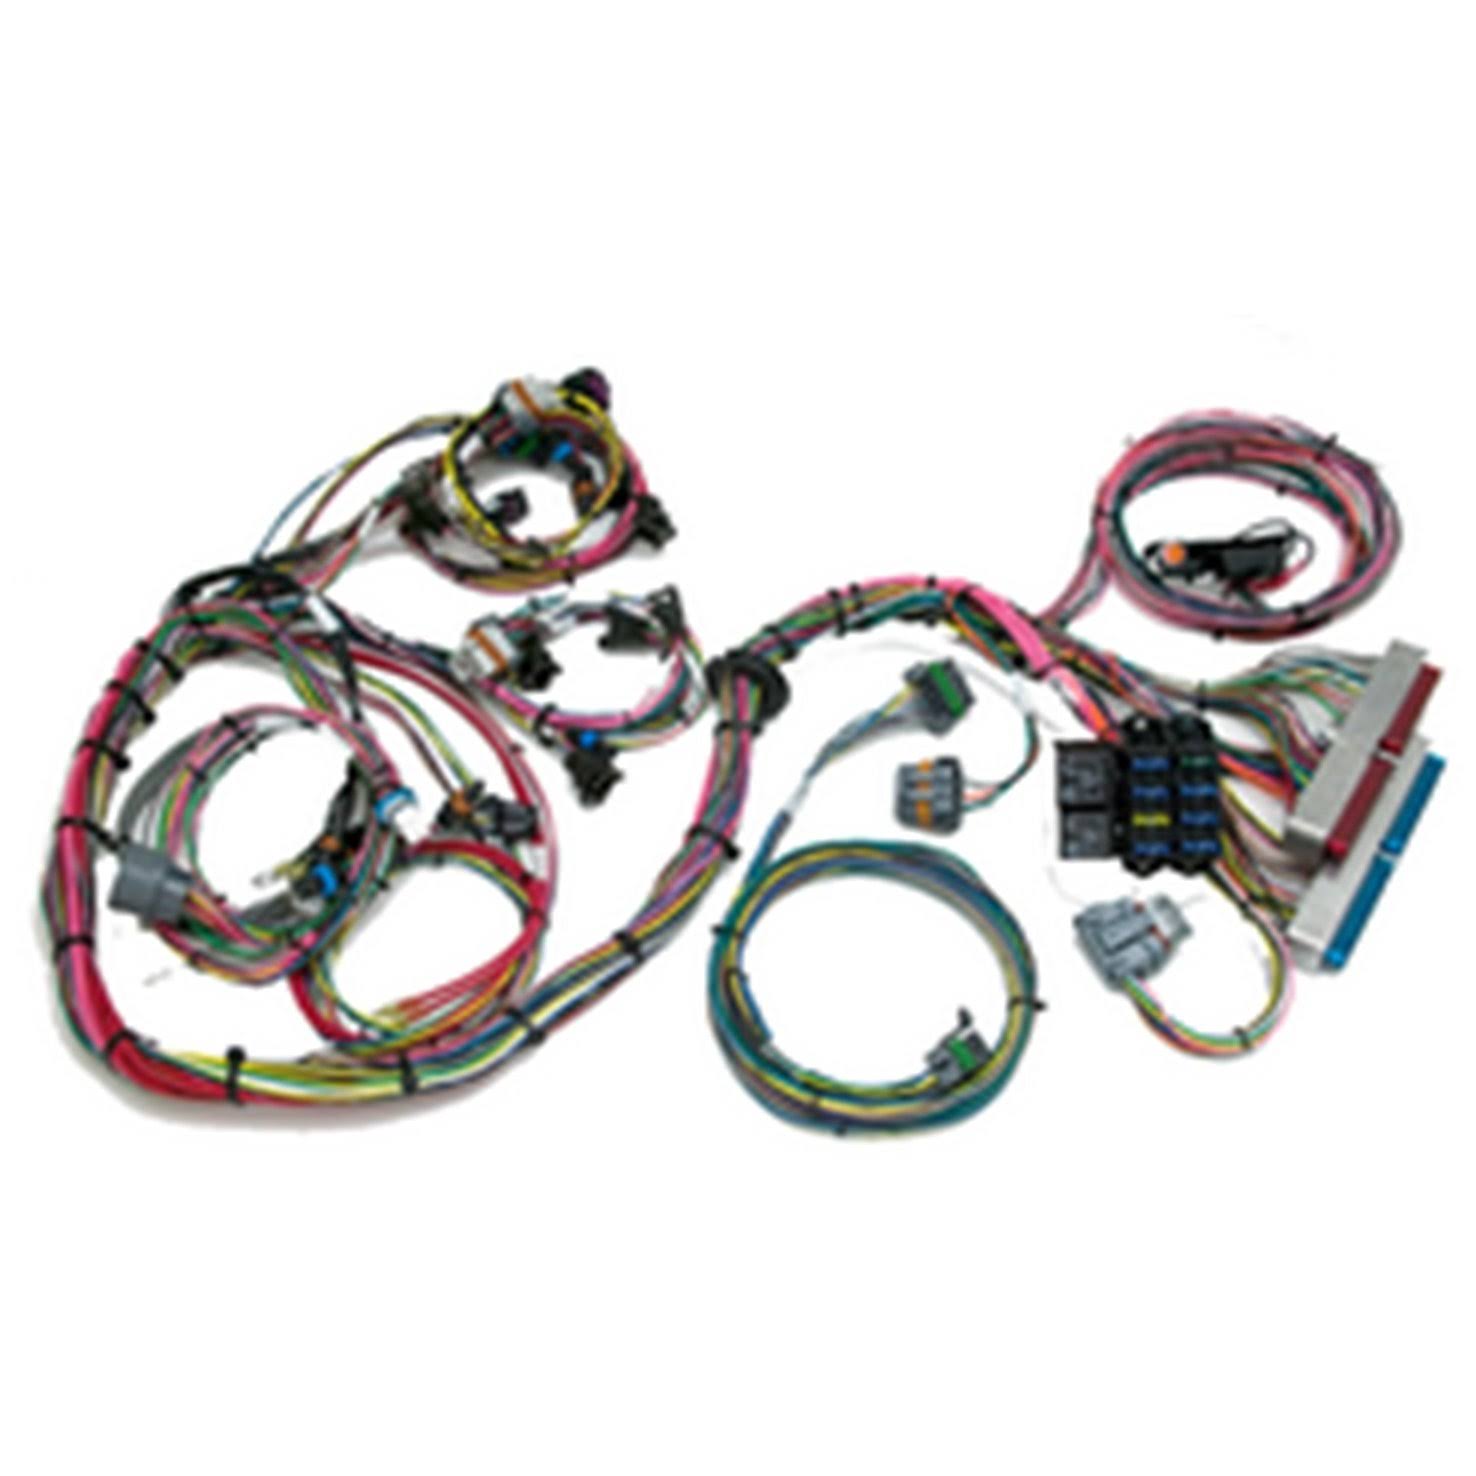 Painless 60522 Fuel Injection Wiring Harness Wgl 1 S